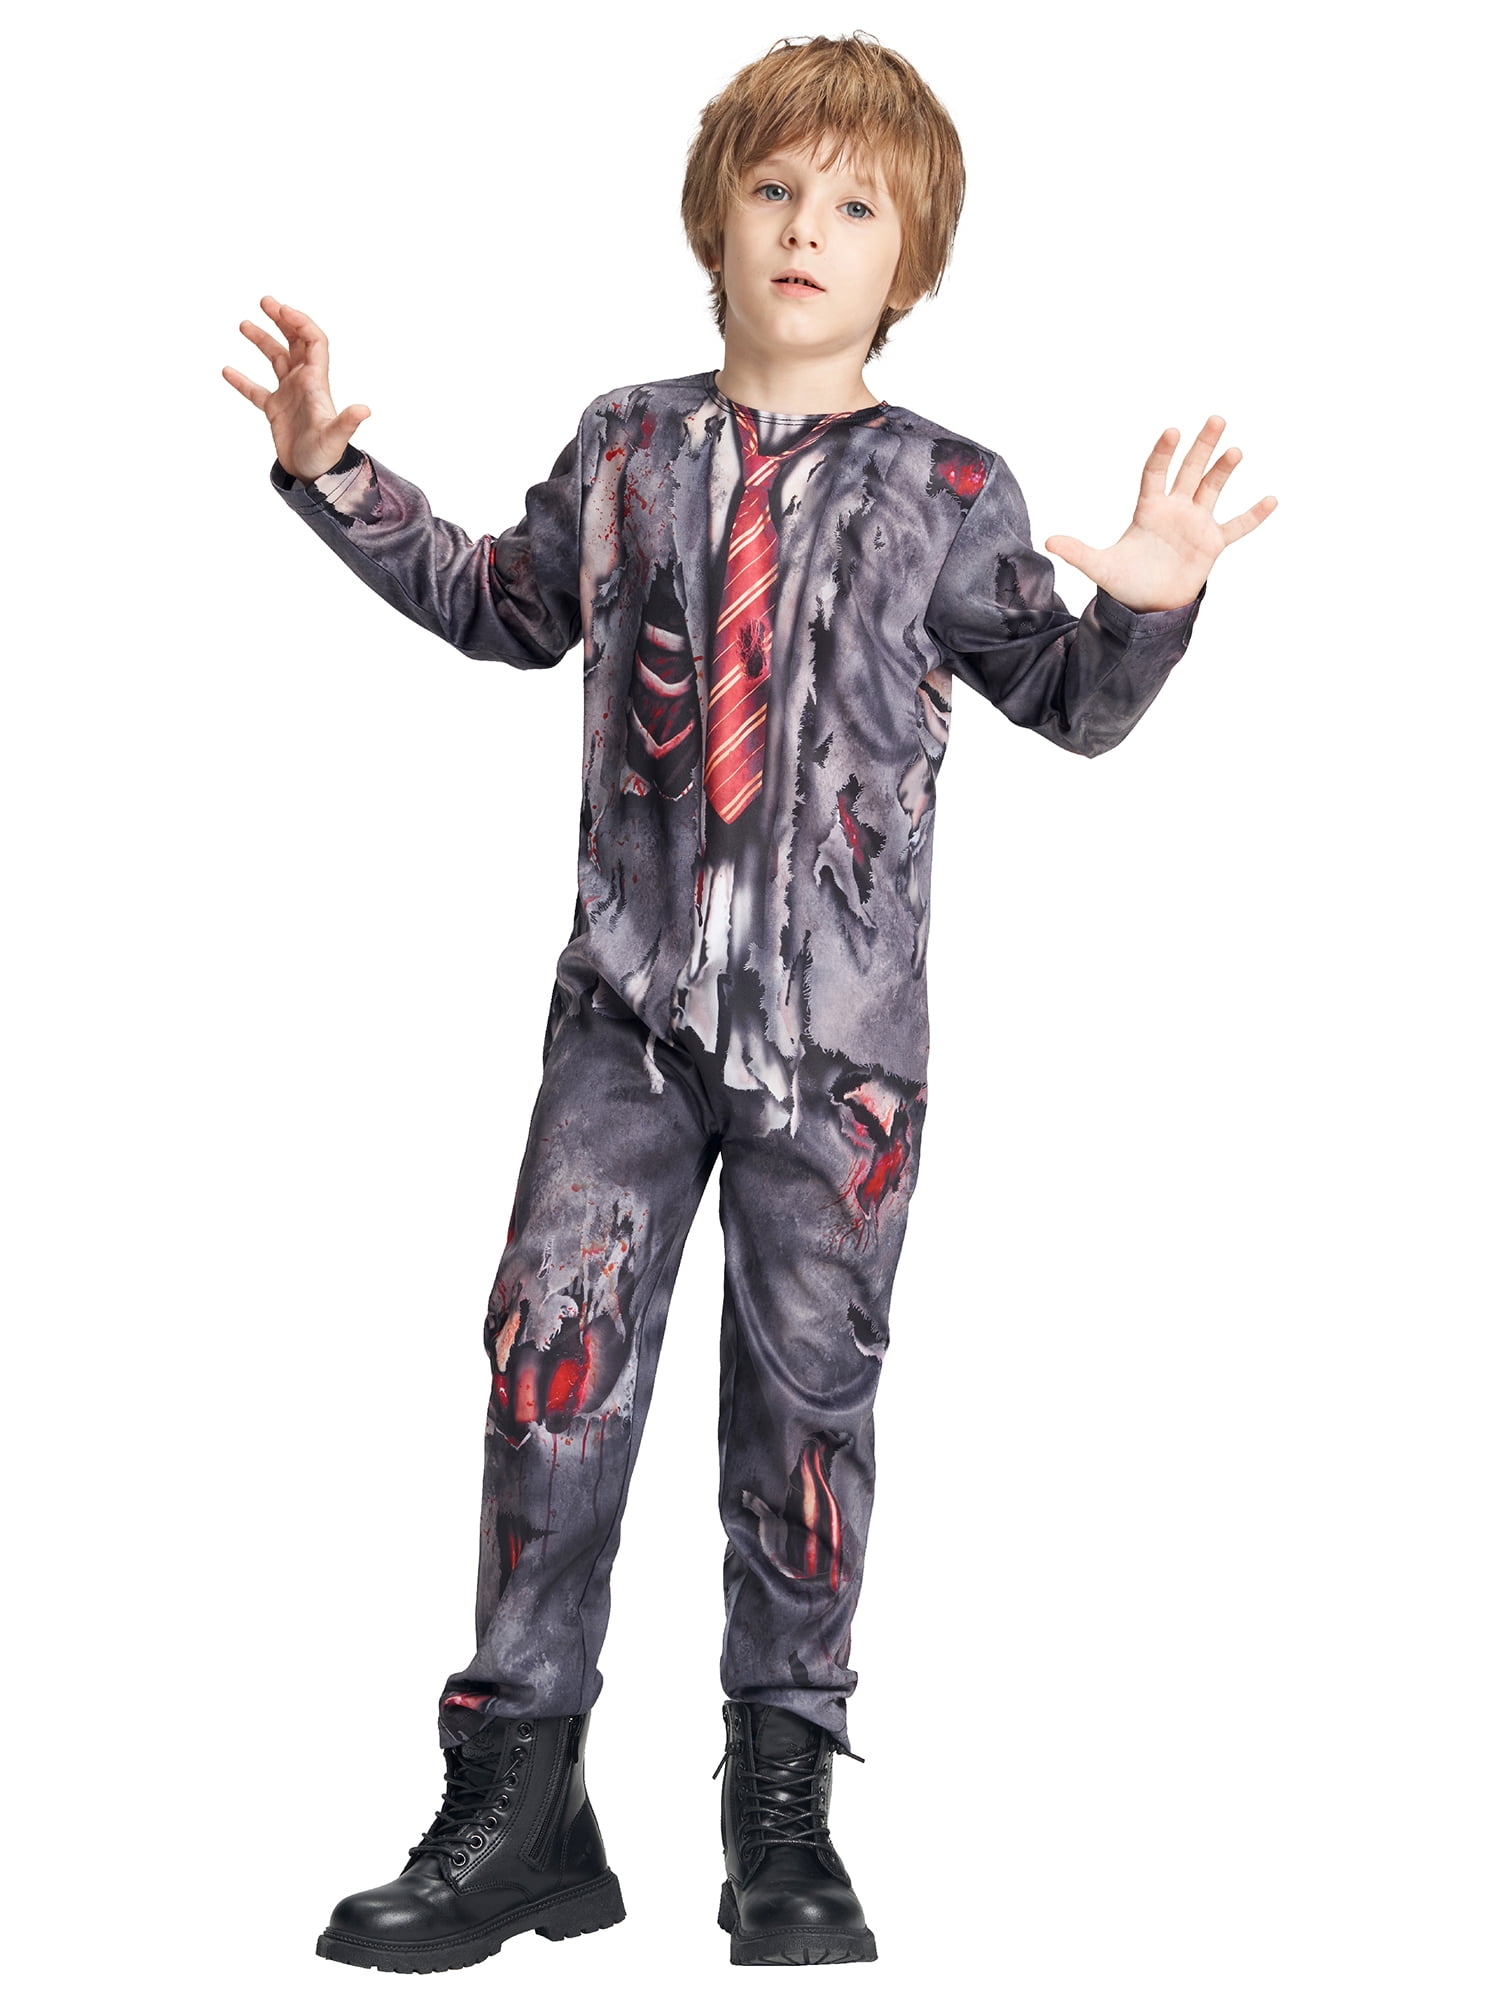 Clothing Sets Check Boy Suit Casual Jacket Pants Wedding Kids Tuxedo Party  Dress Child Formal Blazer 10 Years Old W0224 From Liancheng05, $36.58 |  DHgate.Com